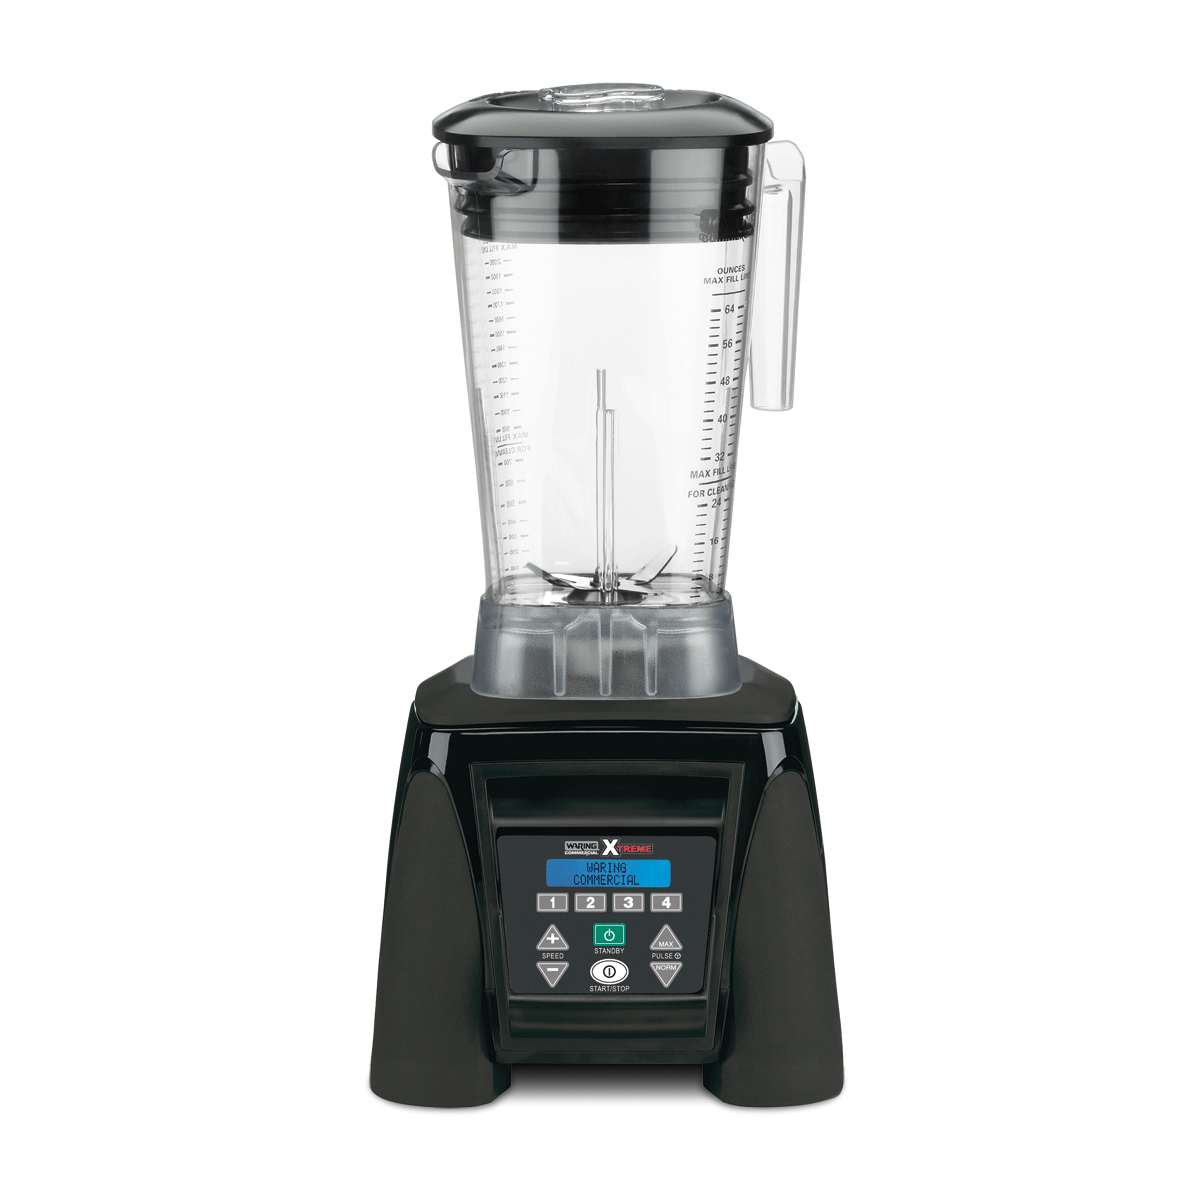 Heavy Duty Blender-Variable Speed 1liter Stainless Steel Container